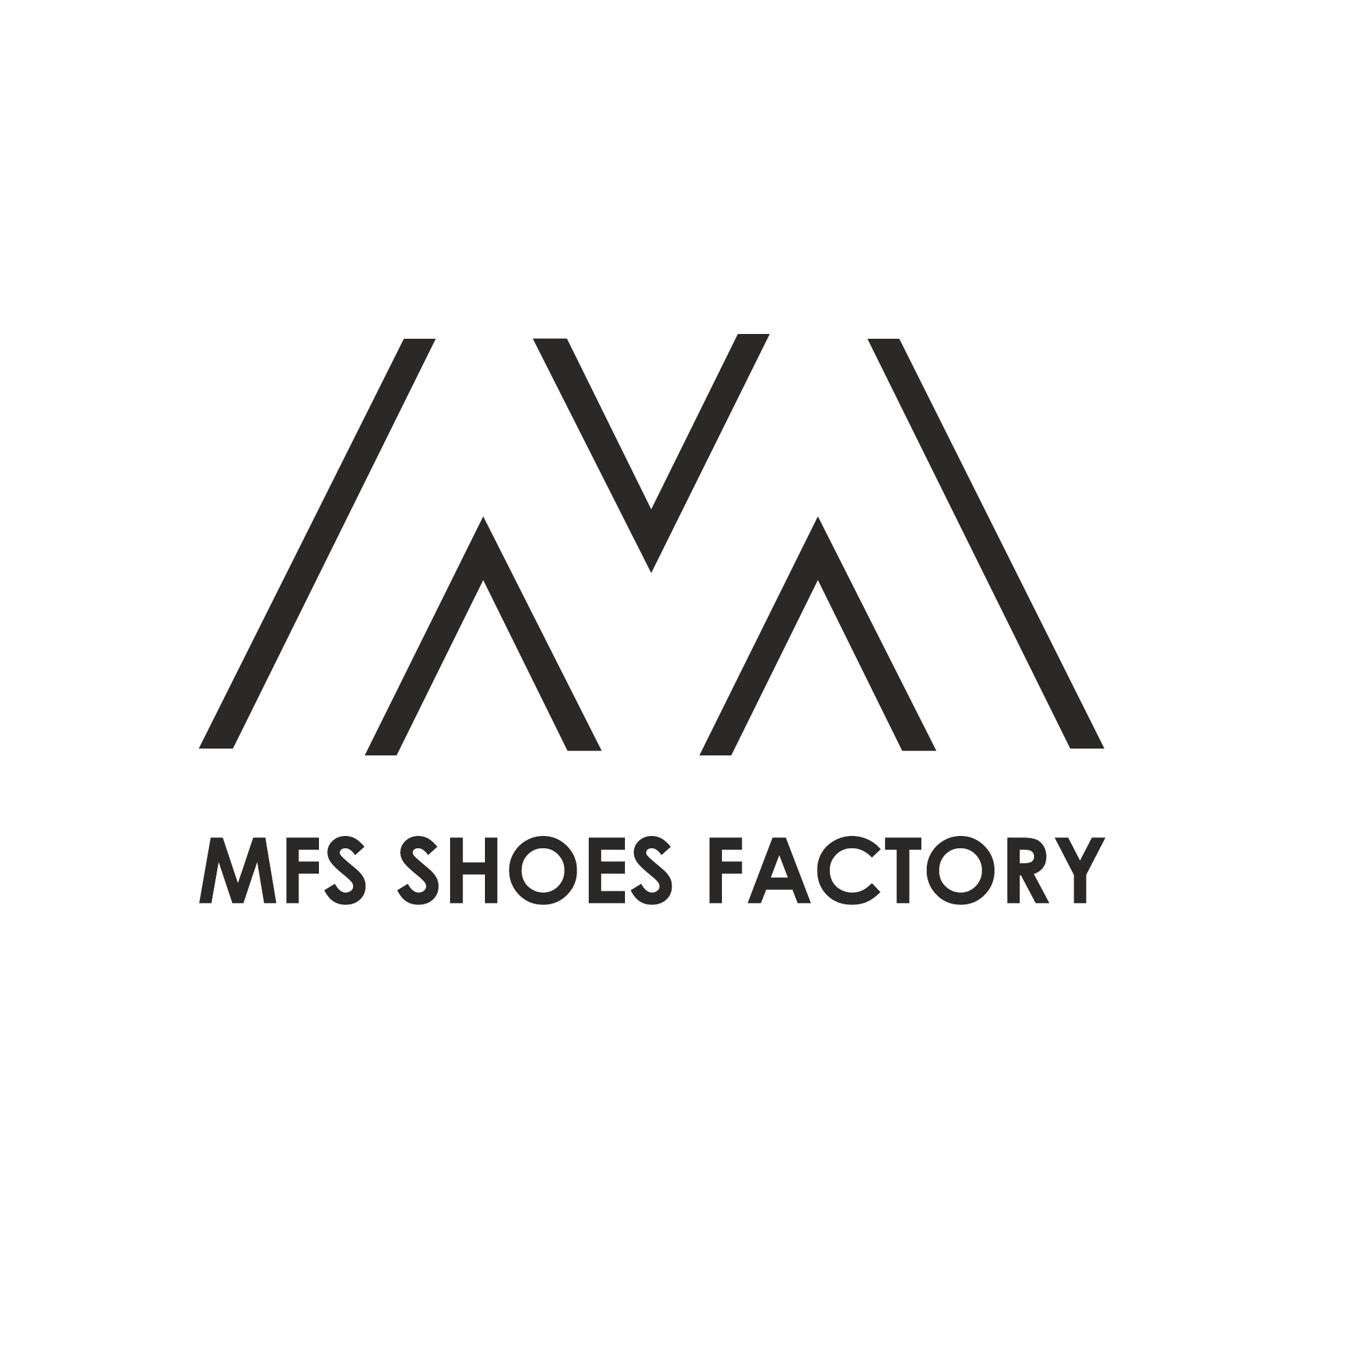 MFS SHOES FACTORY